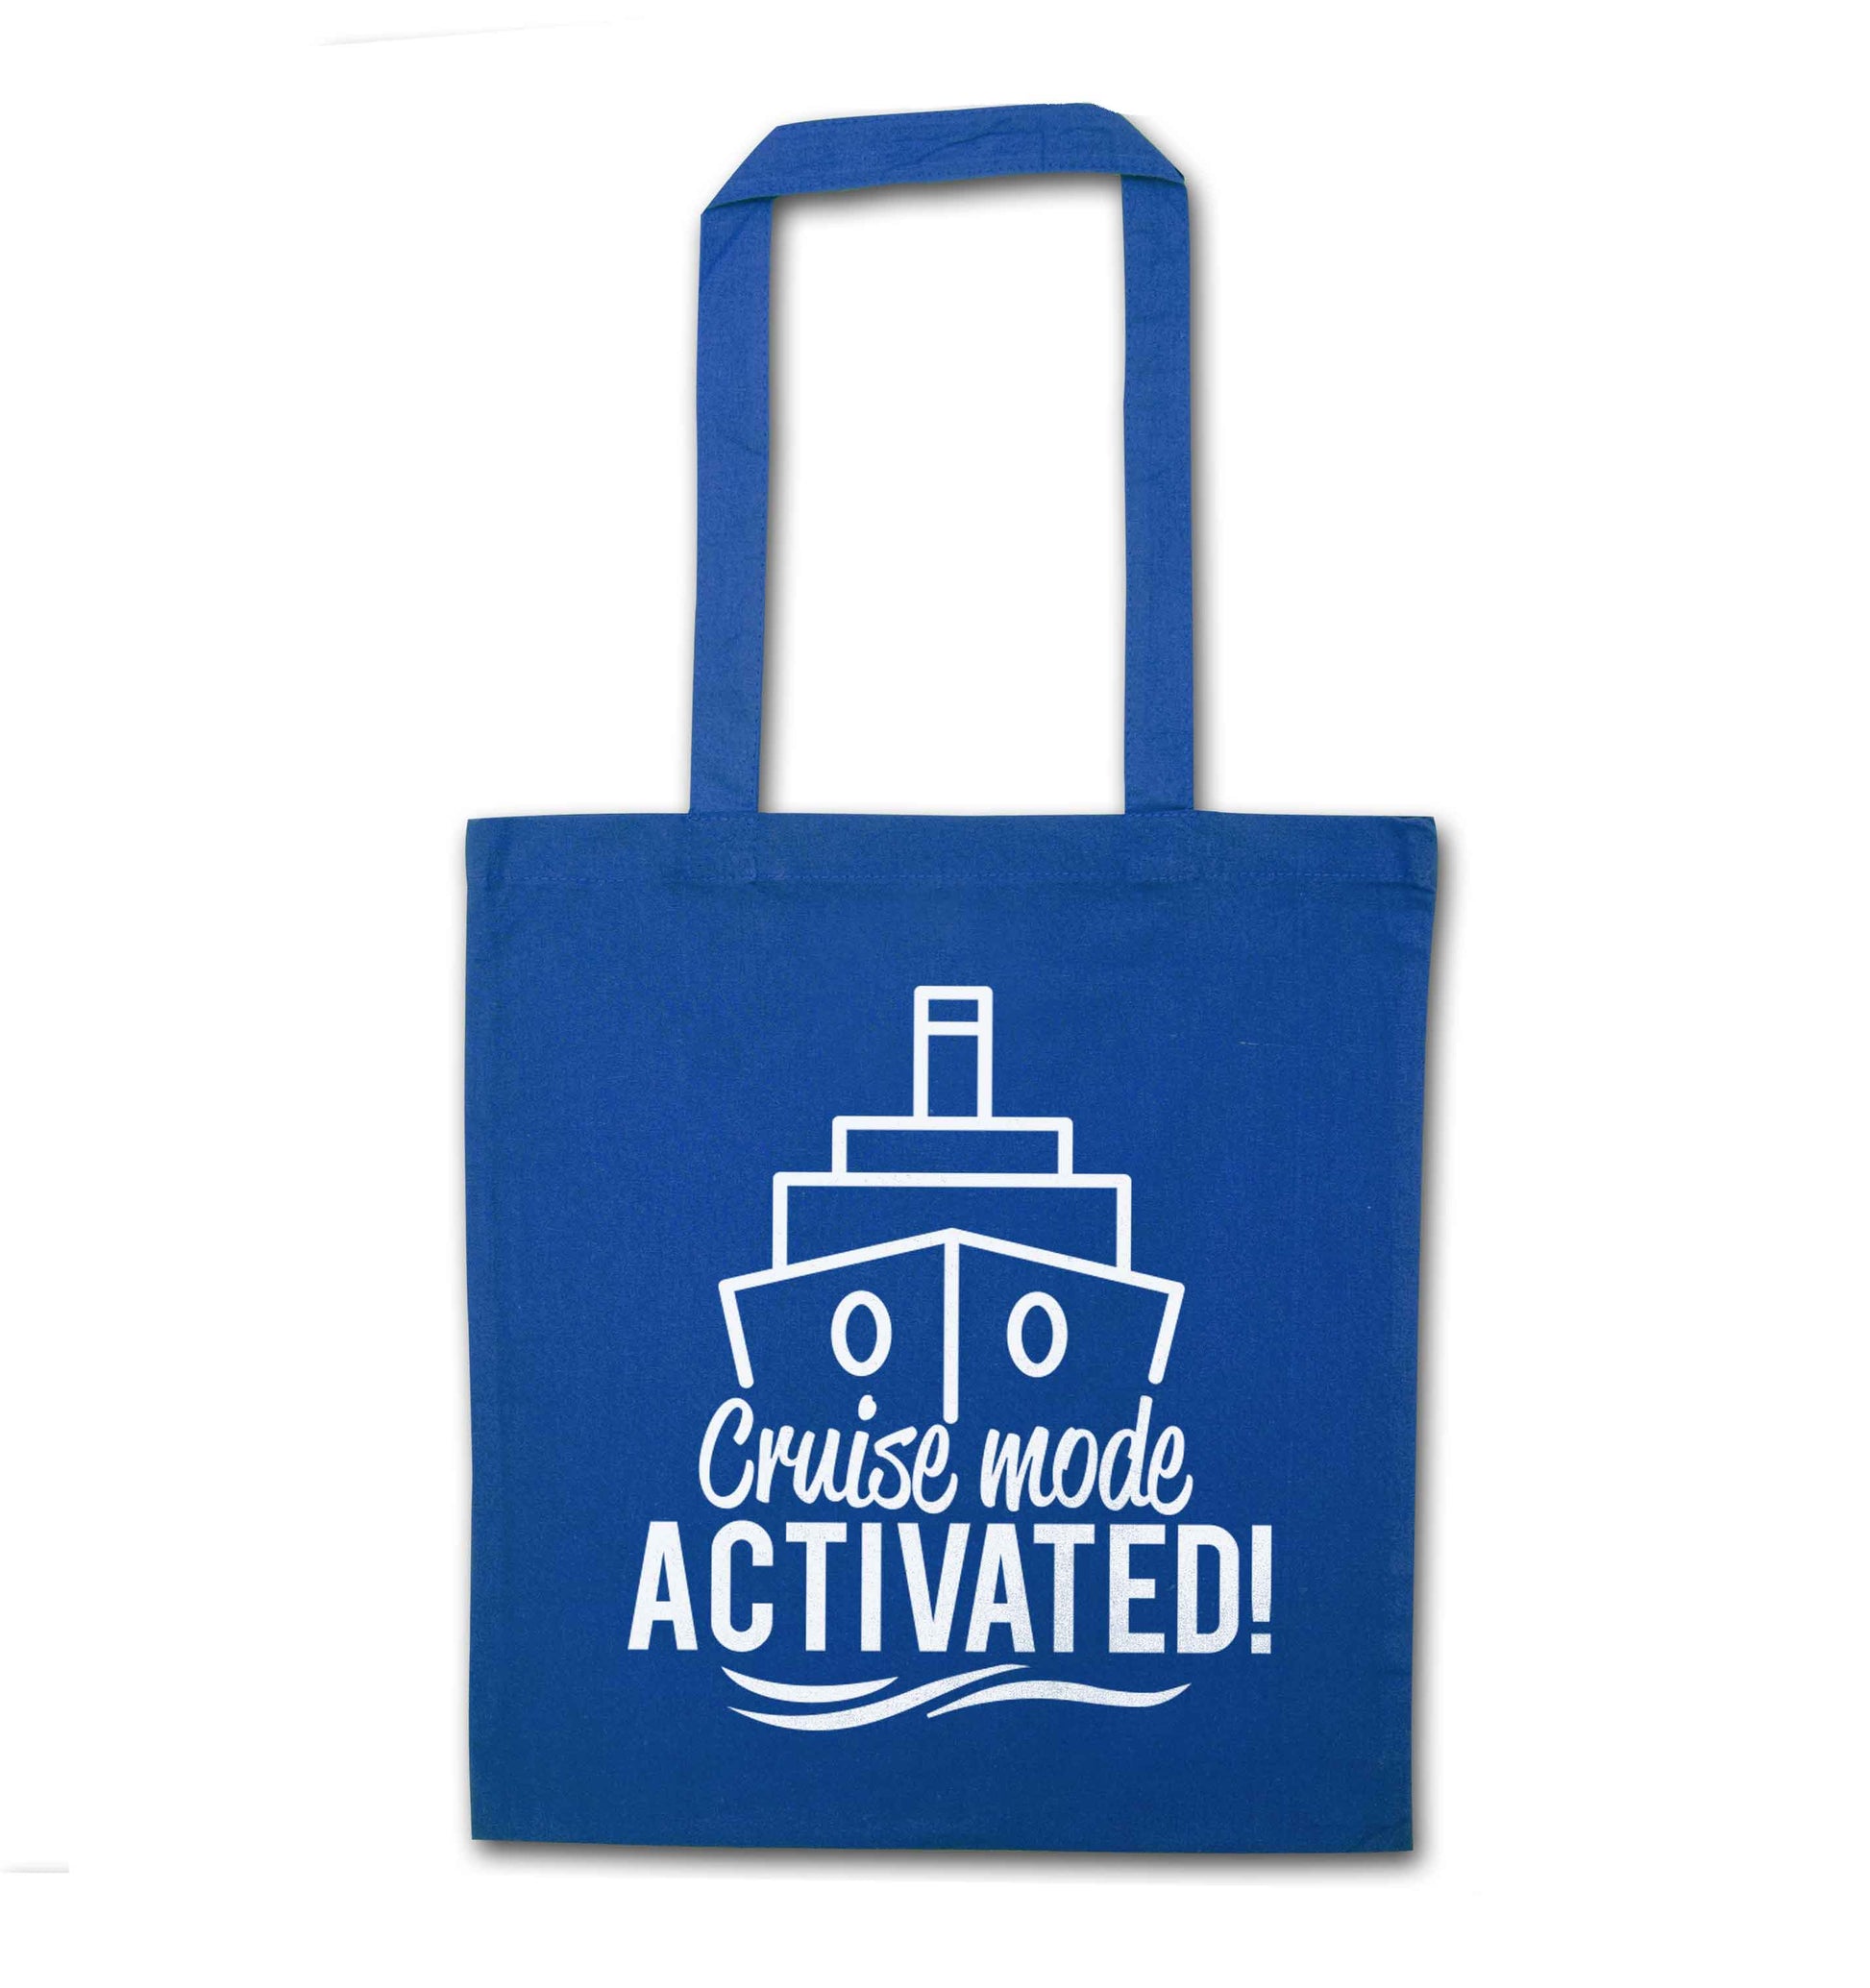 Cruise mode activated blue tote bag